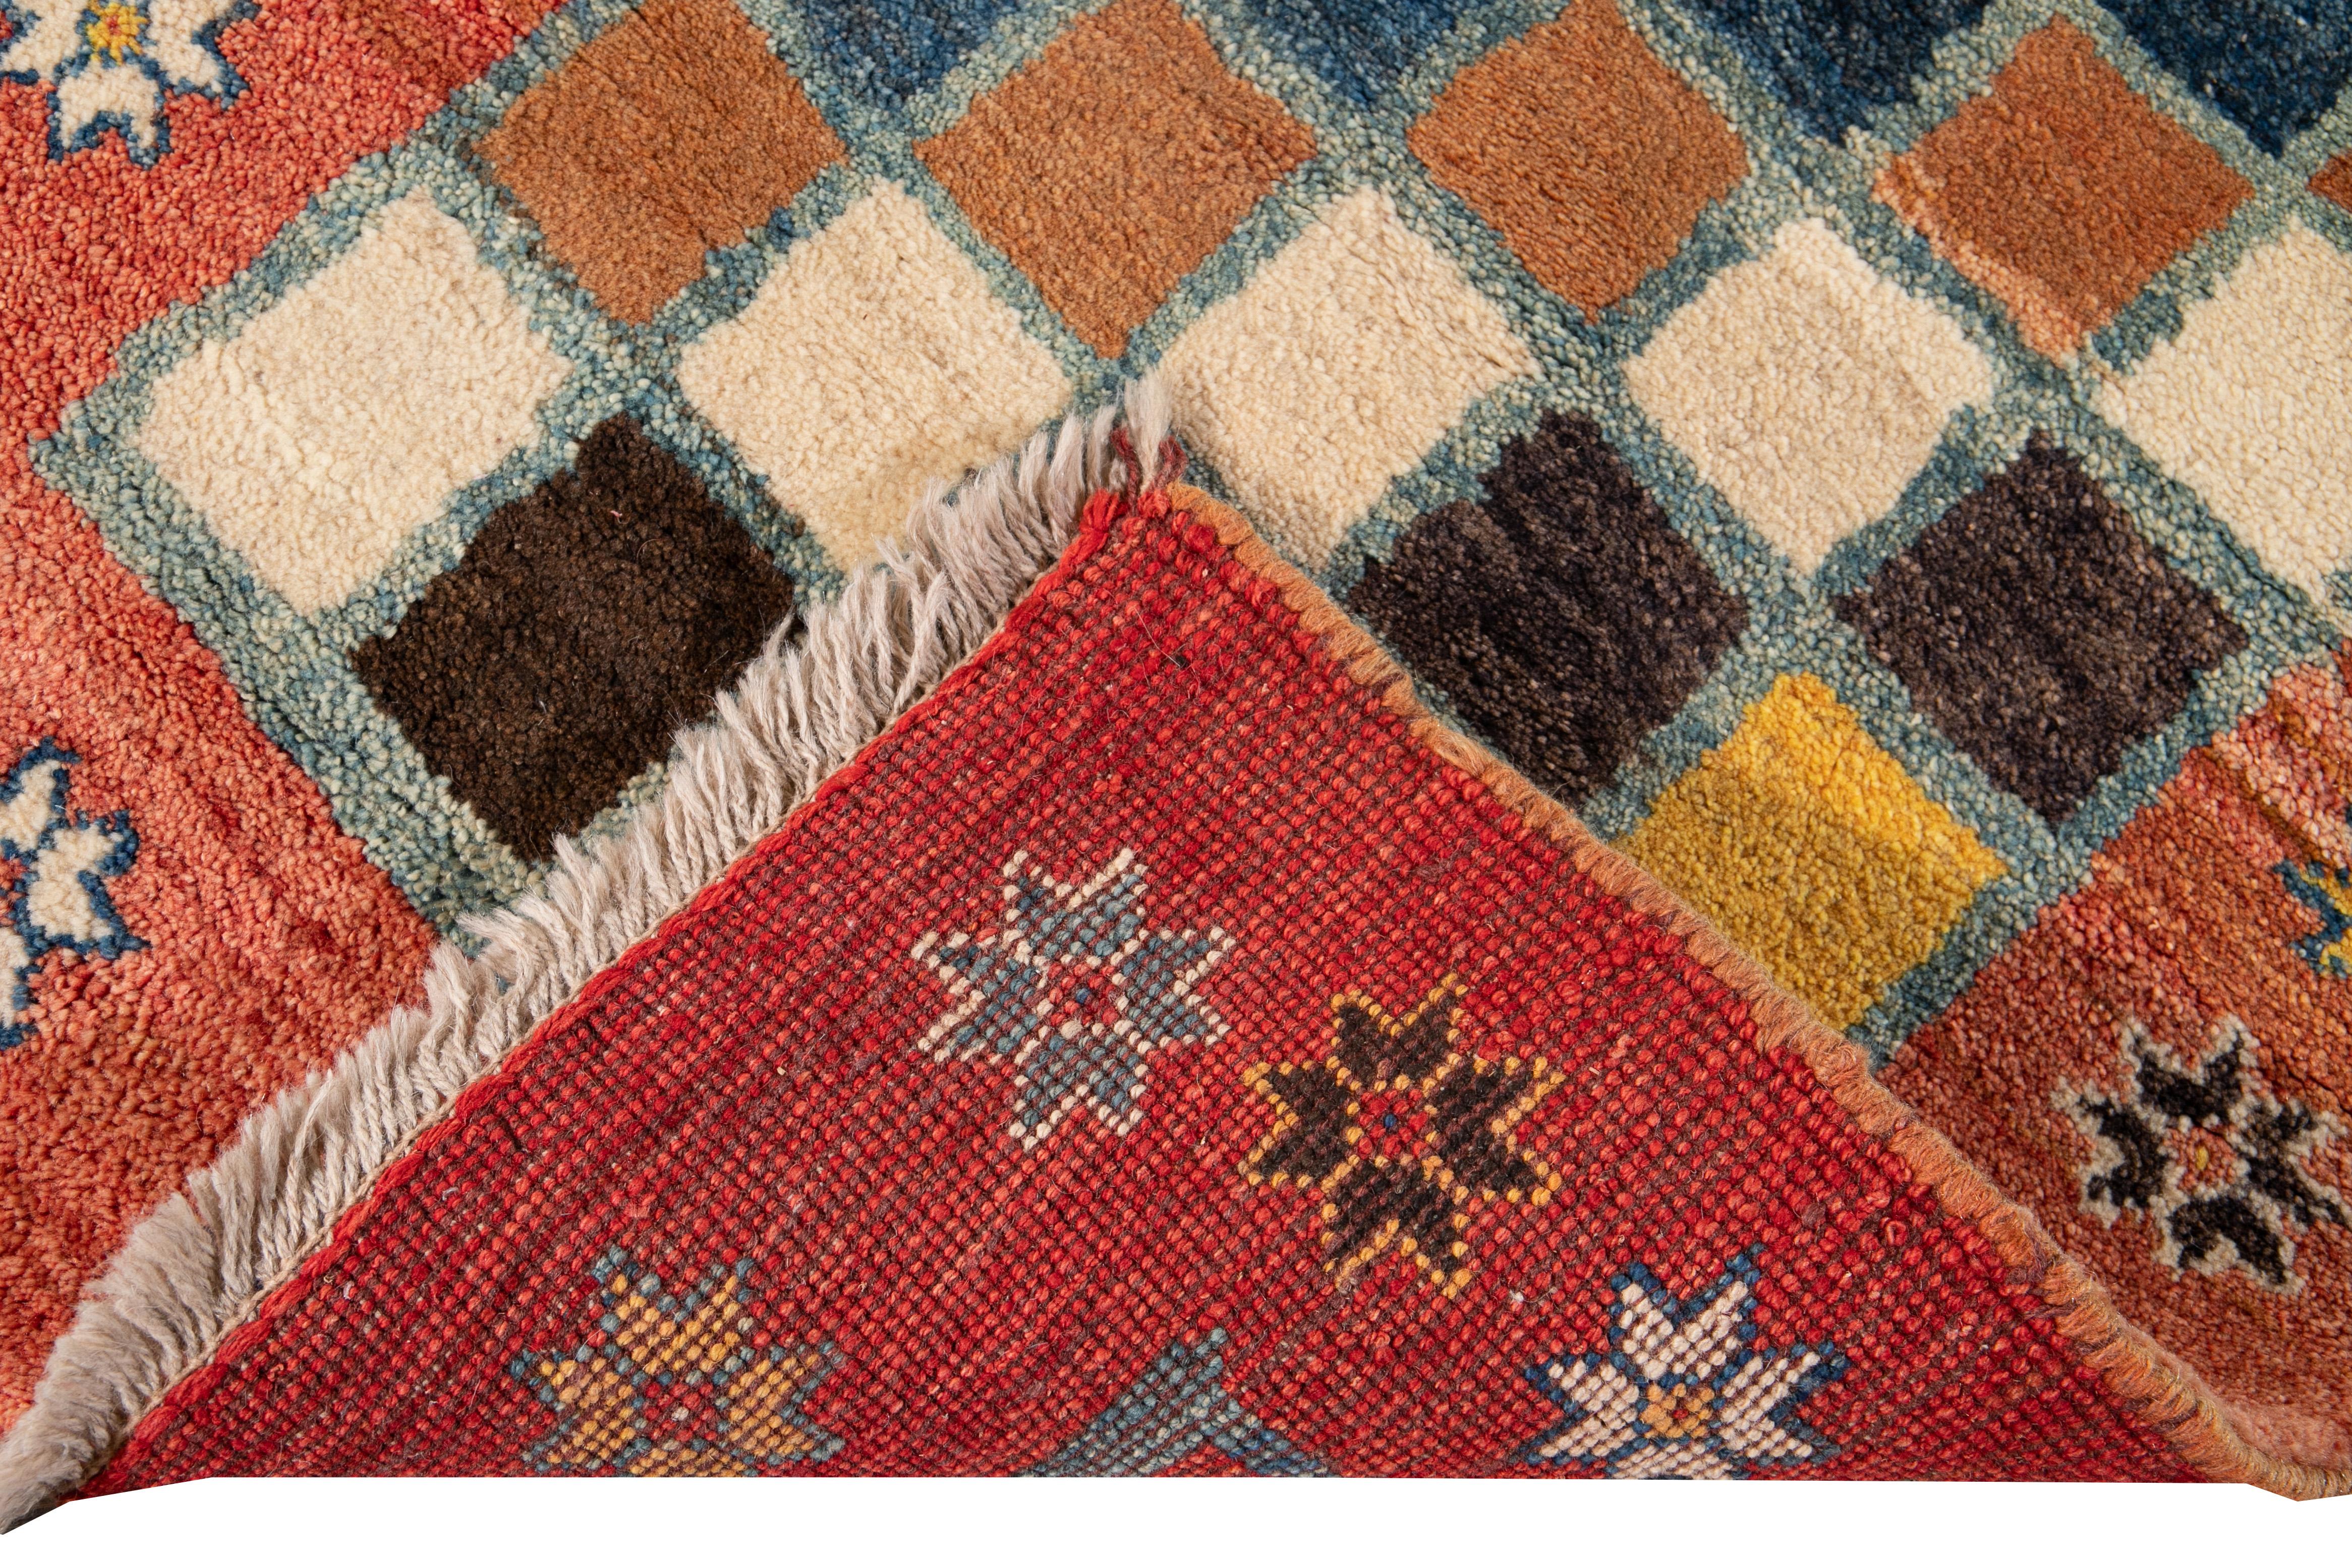 Beautiful modern Persian Gabbeh hand knotted wool runner with a multi-color checked field. This Gabbeh runner has an orange gorgeous geometric floral design.

This rug measures: 2'9